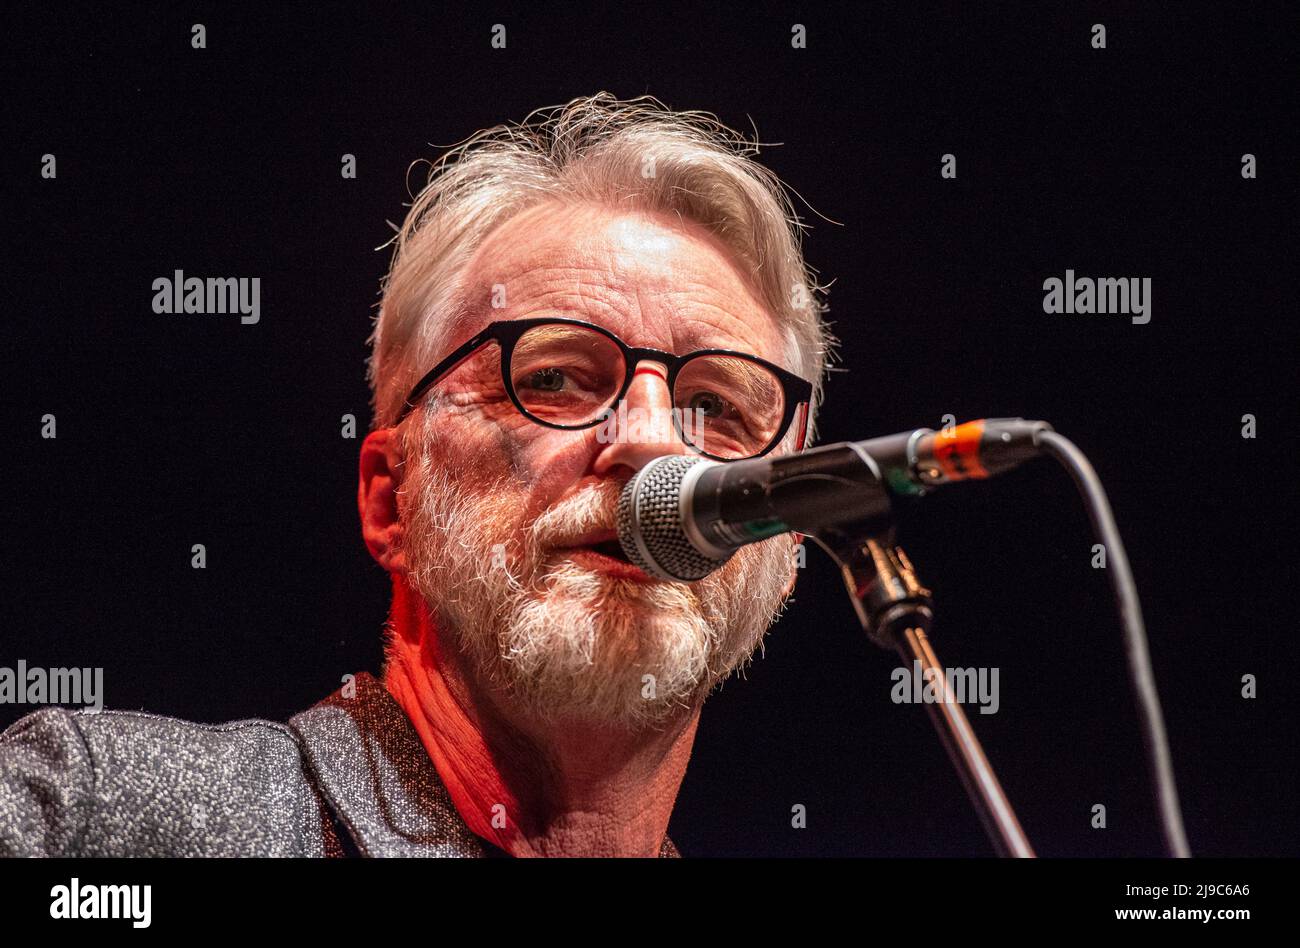 Billy Bragg ends his UK Tour at The Roundhouse in Camden in Central London. Stock Photo